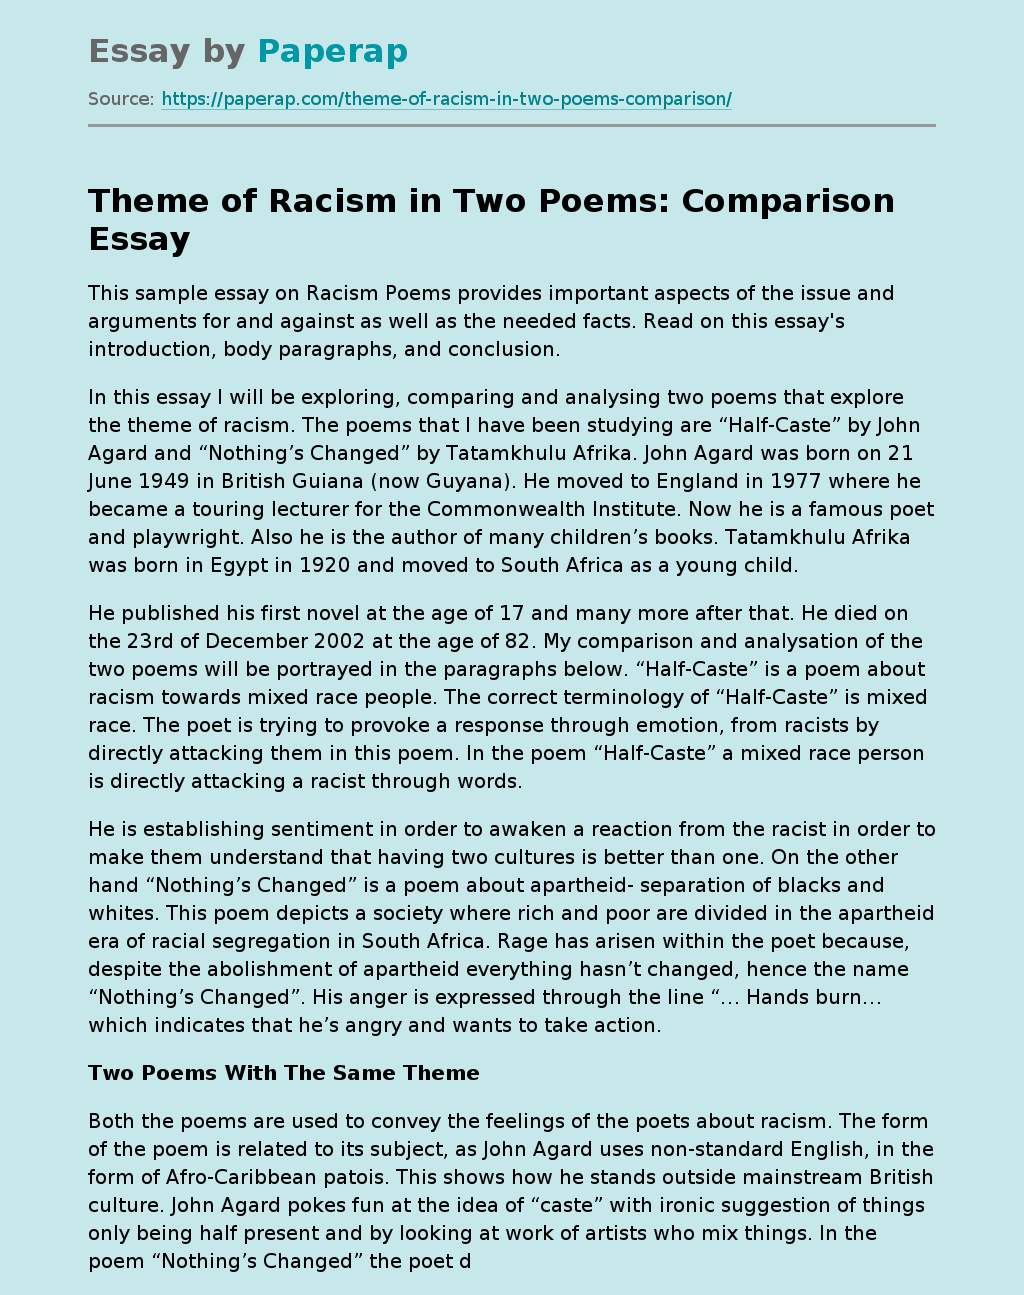 Theme of Racism in Two Poems: Comparison